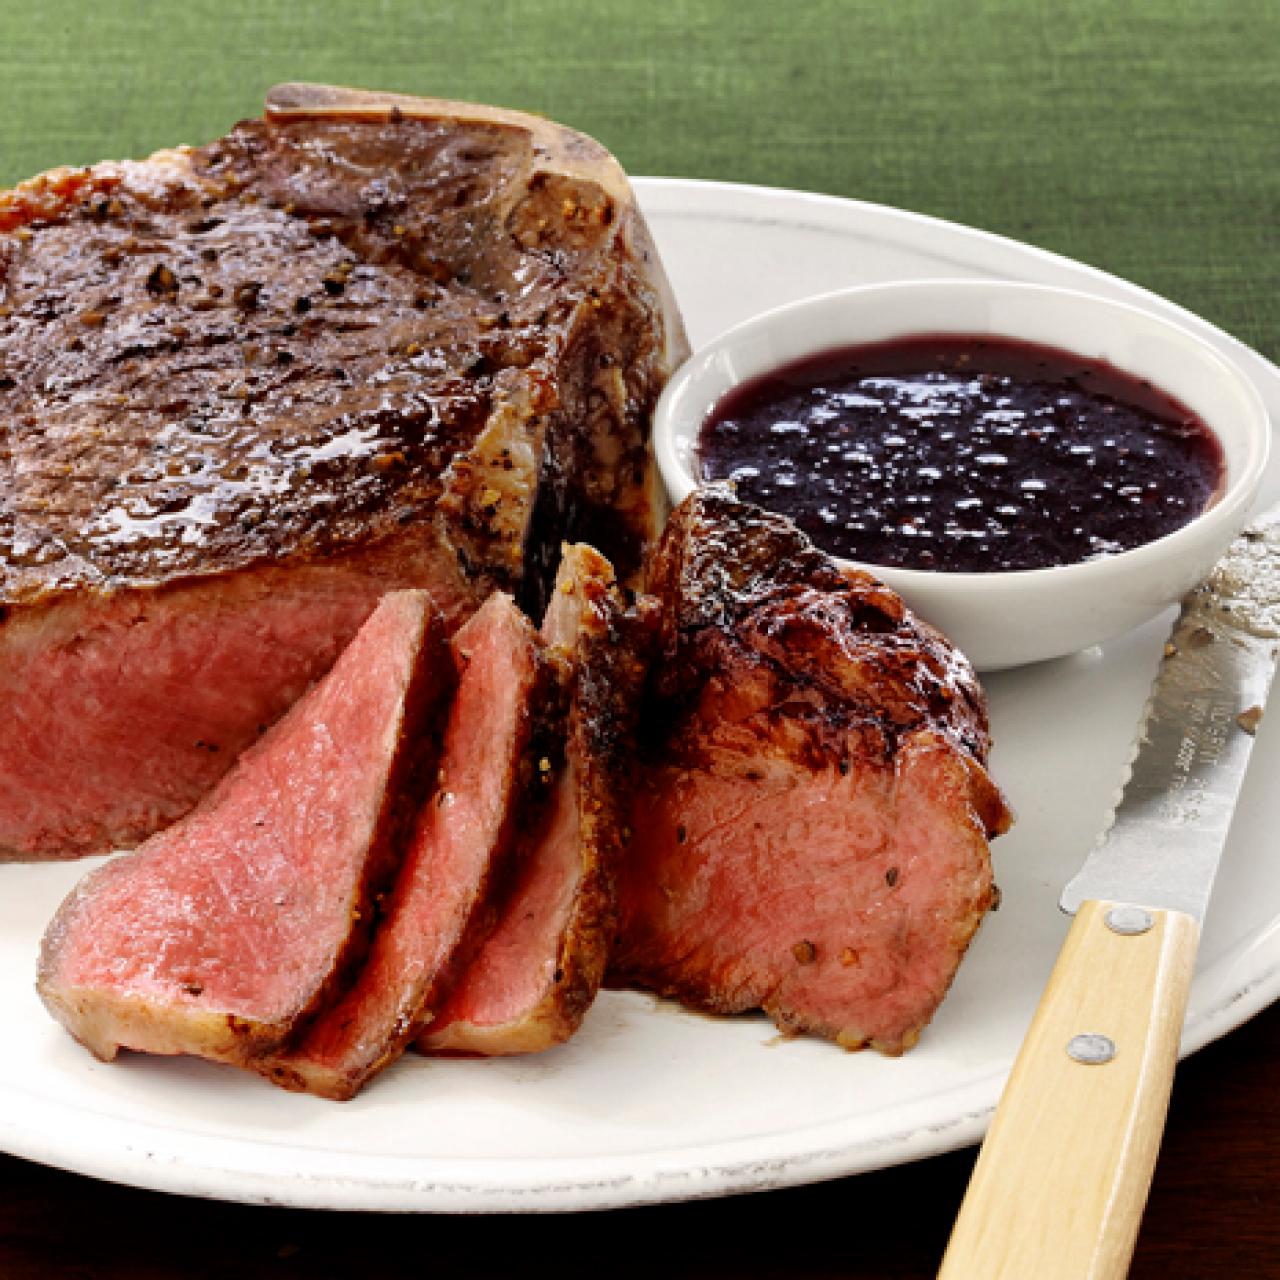 Steak with Red Wine-Shallot Sauce Recipe